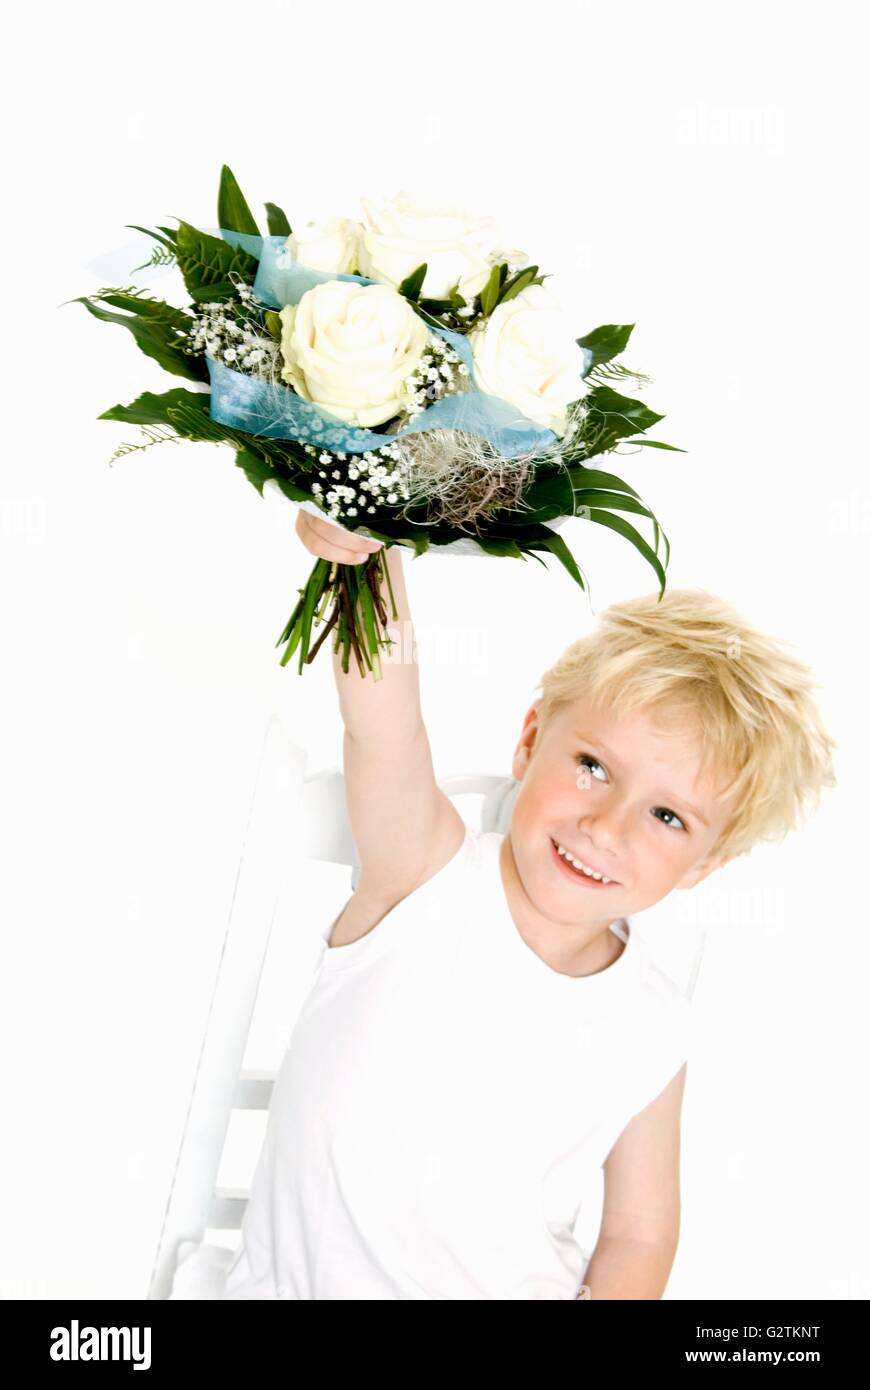 Blond boy holding bouquet of white roses Stock Photo